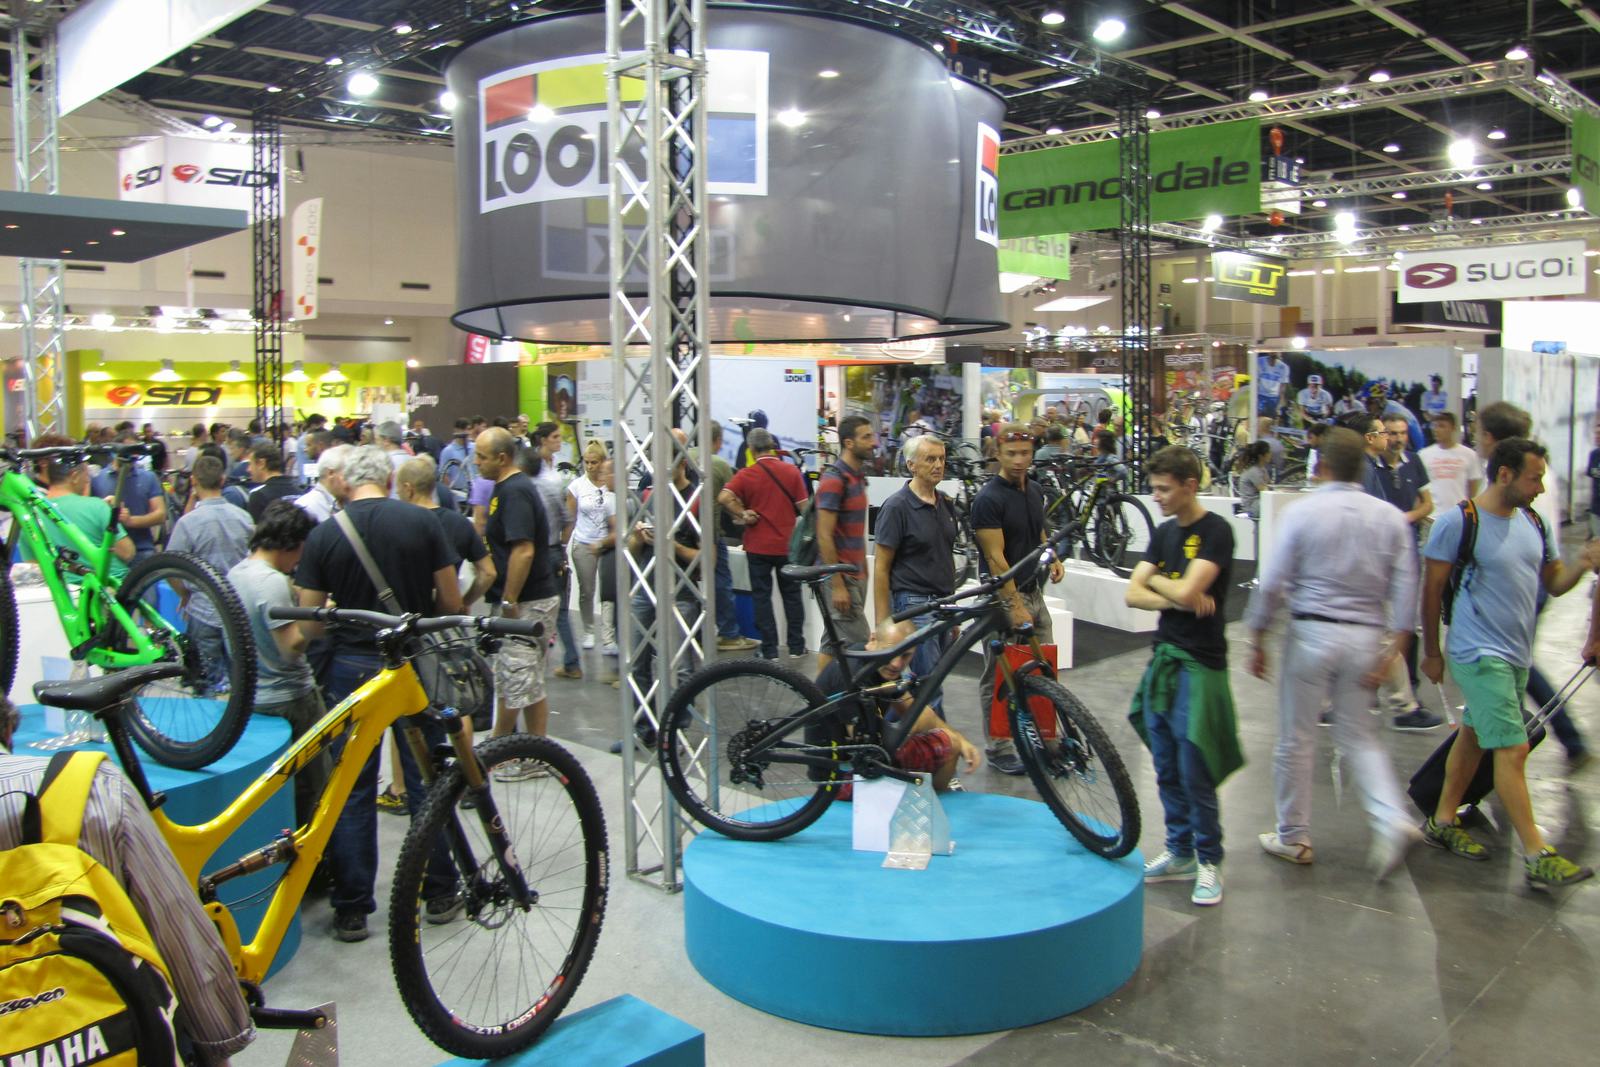 Expobici made clear that the traditional Italian bike companies took once again a step back on their home market in favour of foreign brands. – Photo Bike Europe